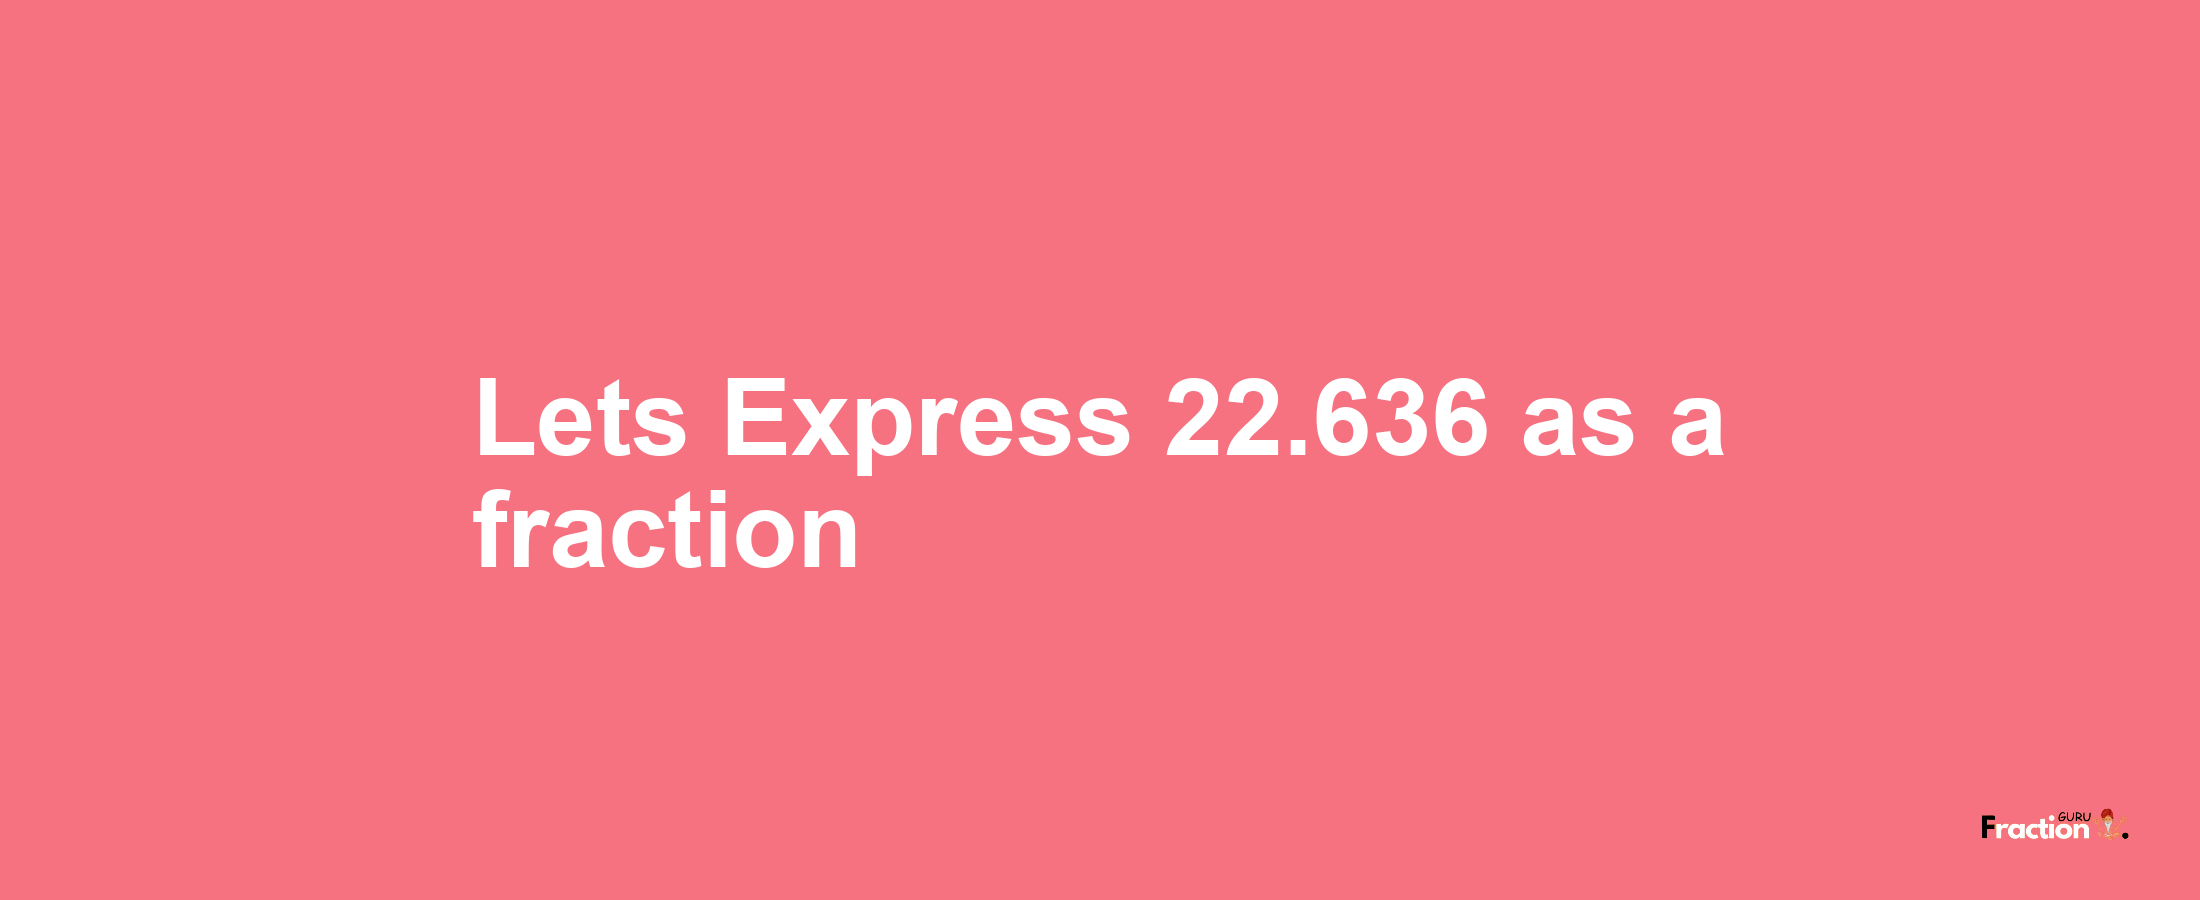 Lets Express 22.636 as afraction